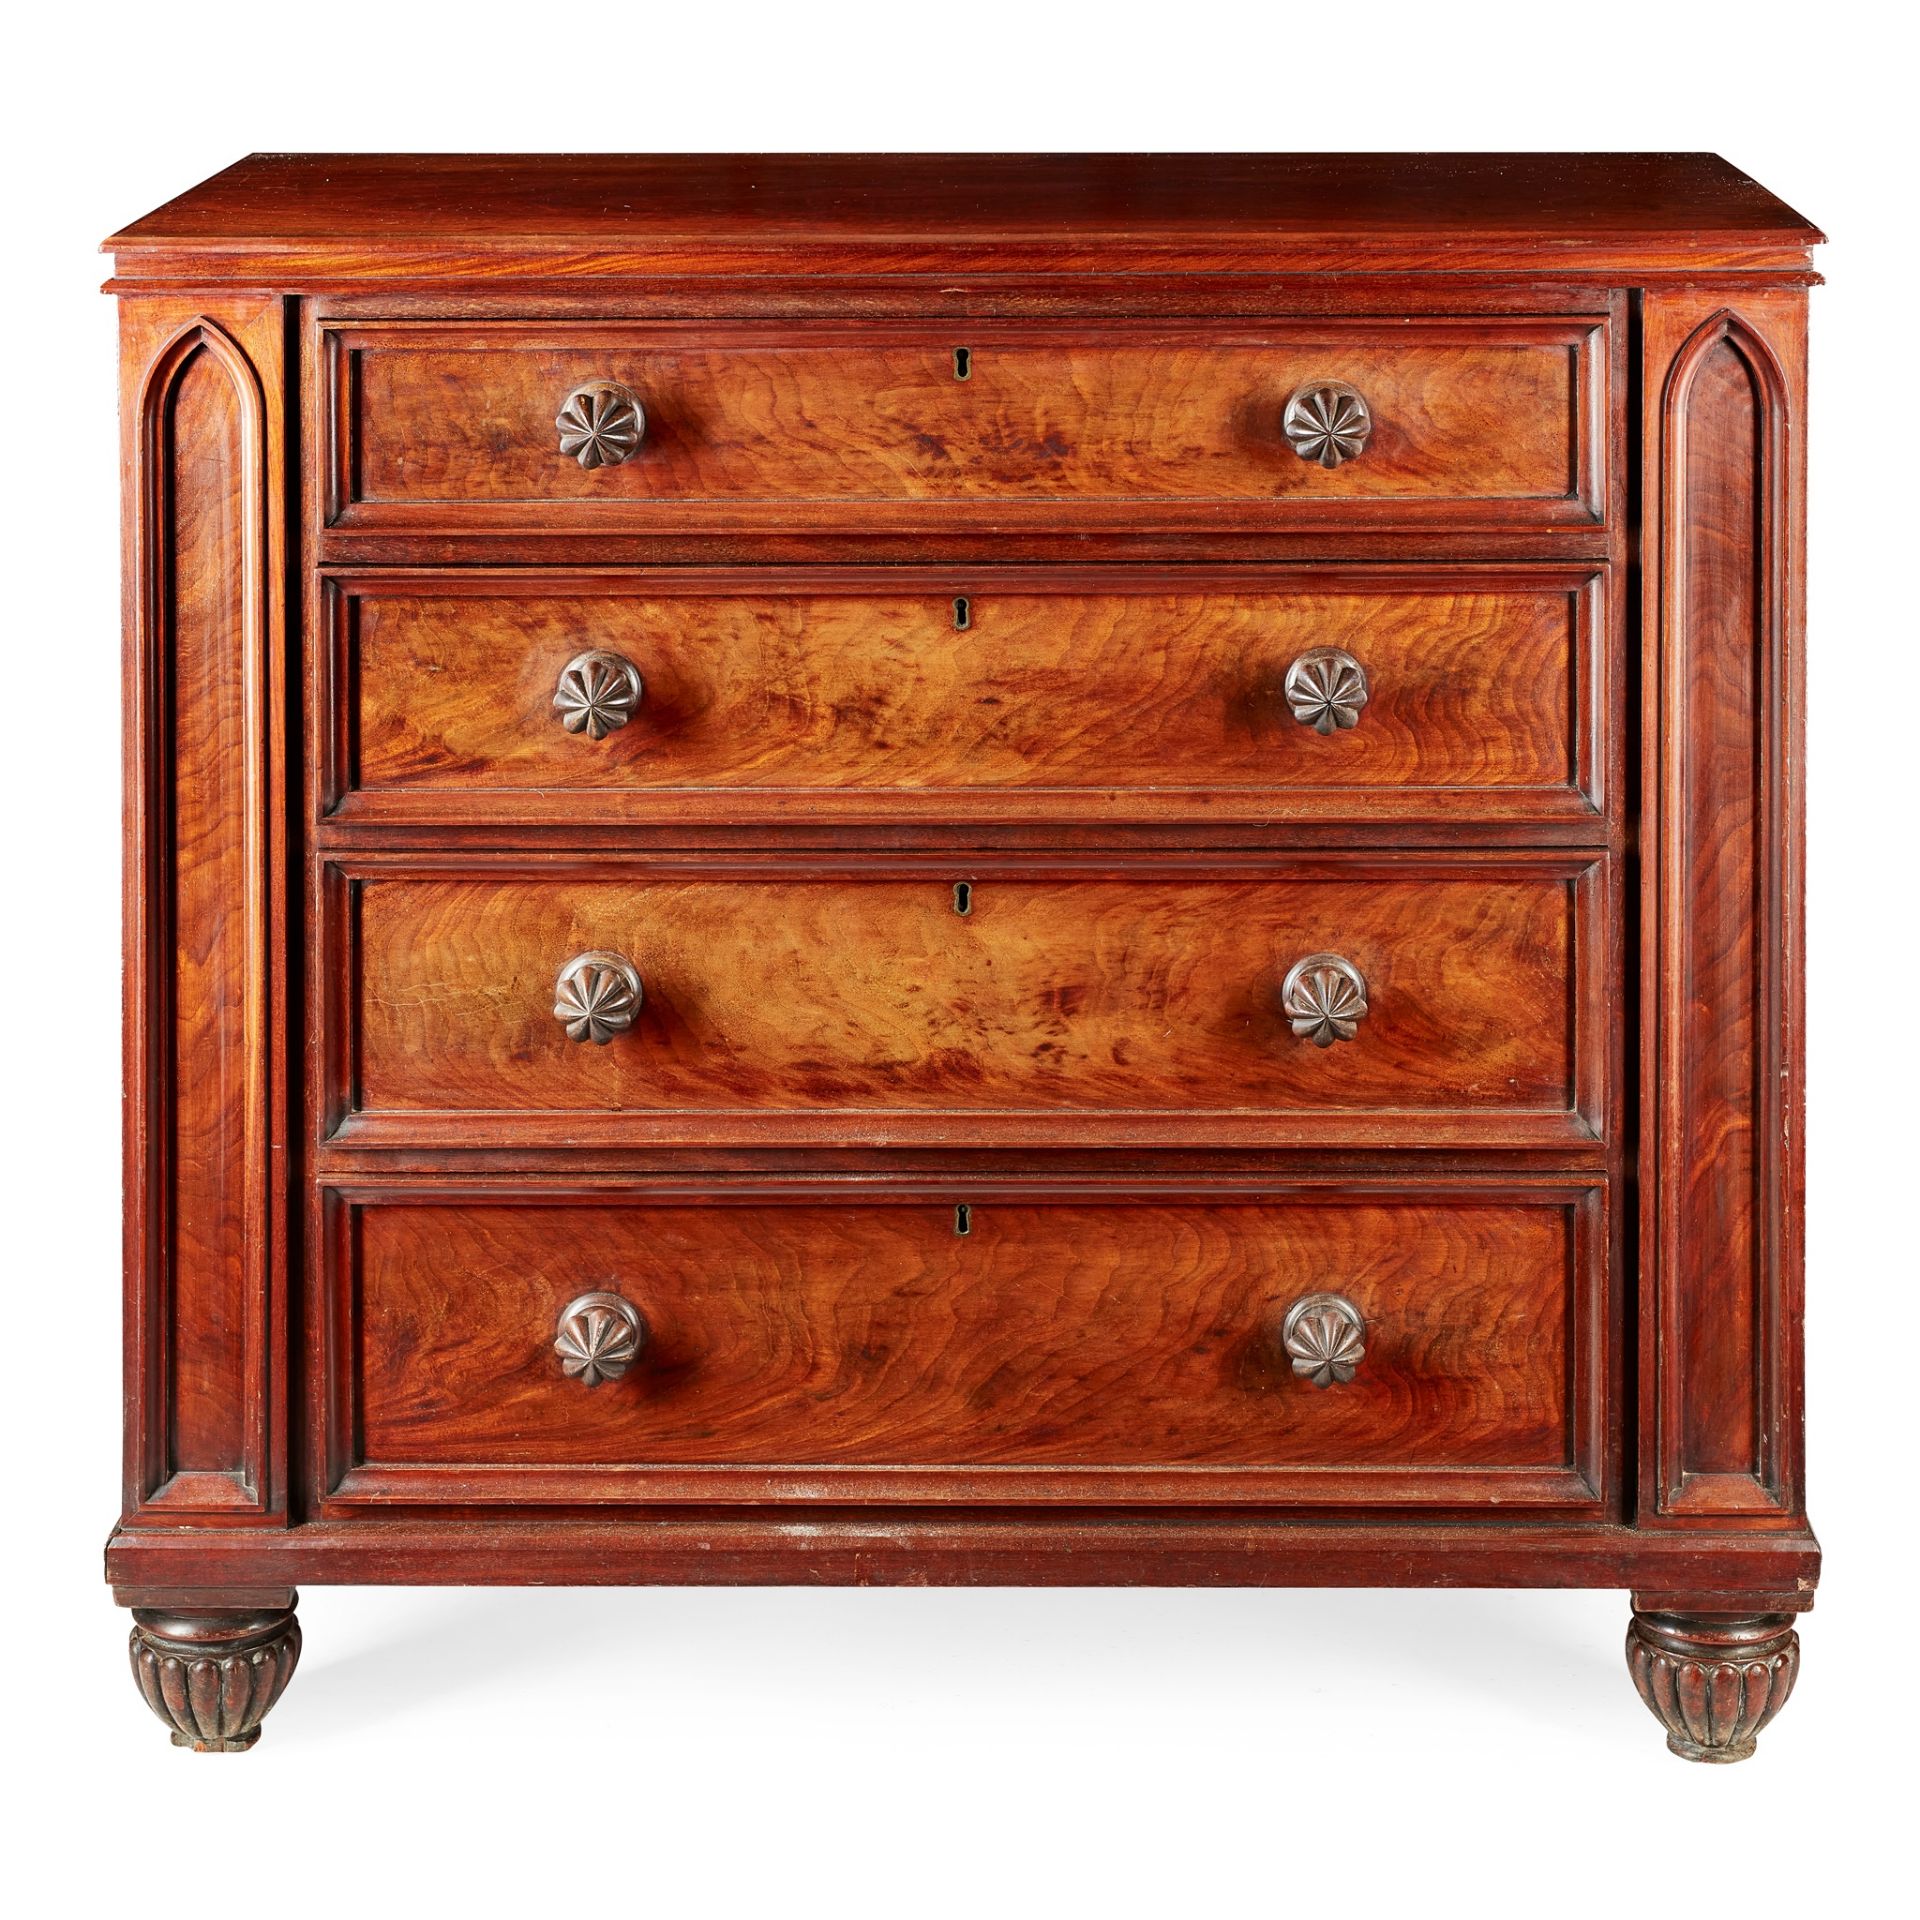 WILLIAM IV MAHOGANY CHEST OF DRAWERS EARLY 19TH CENTURY